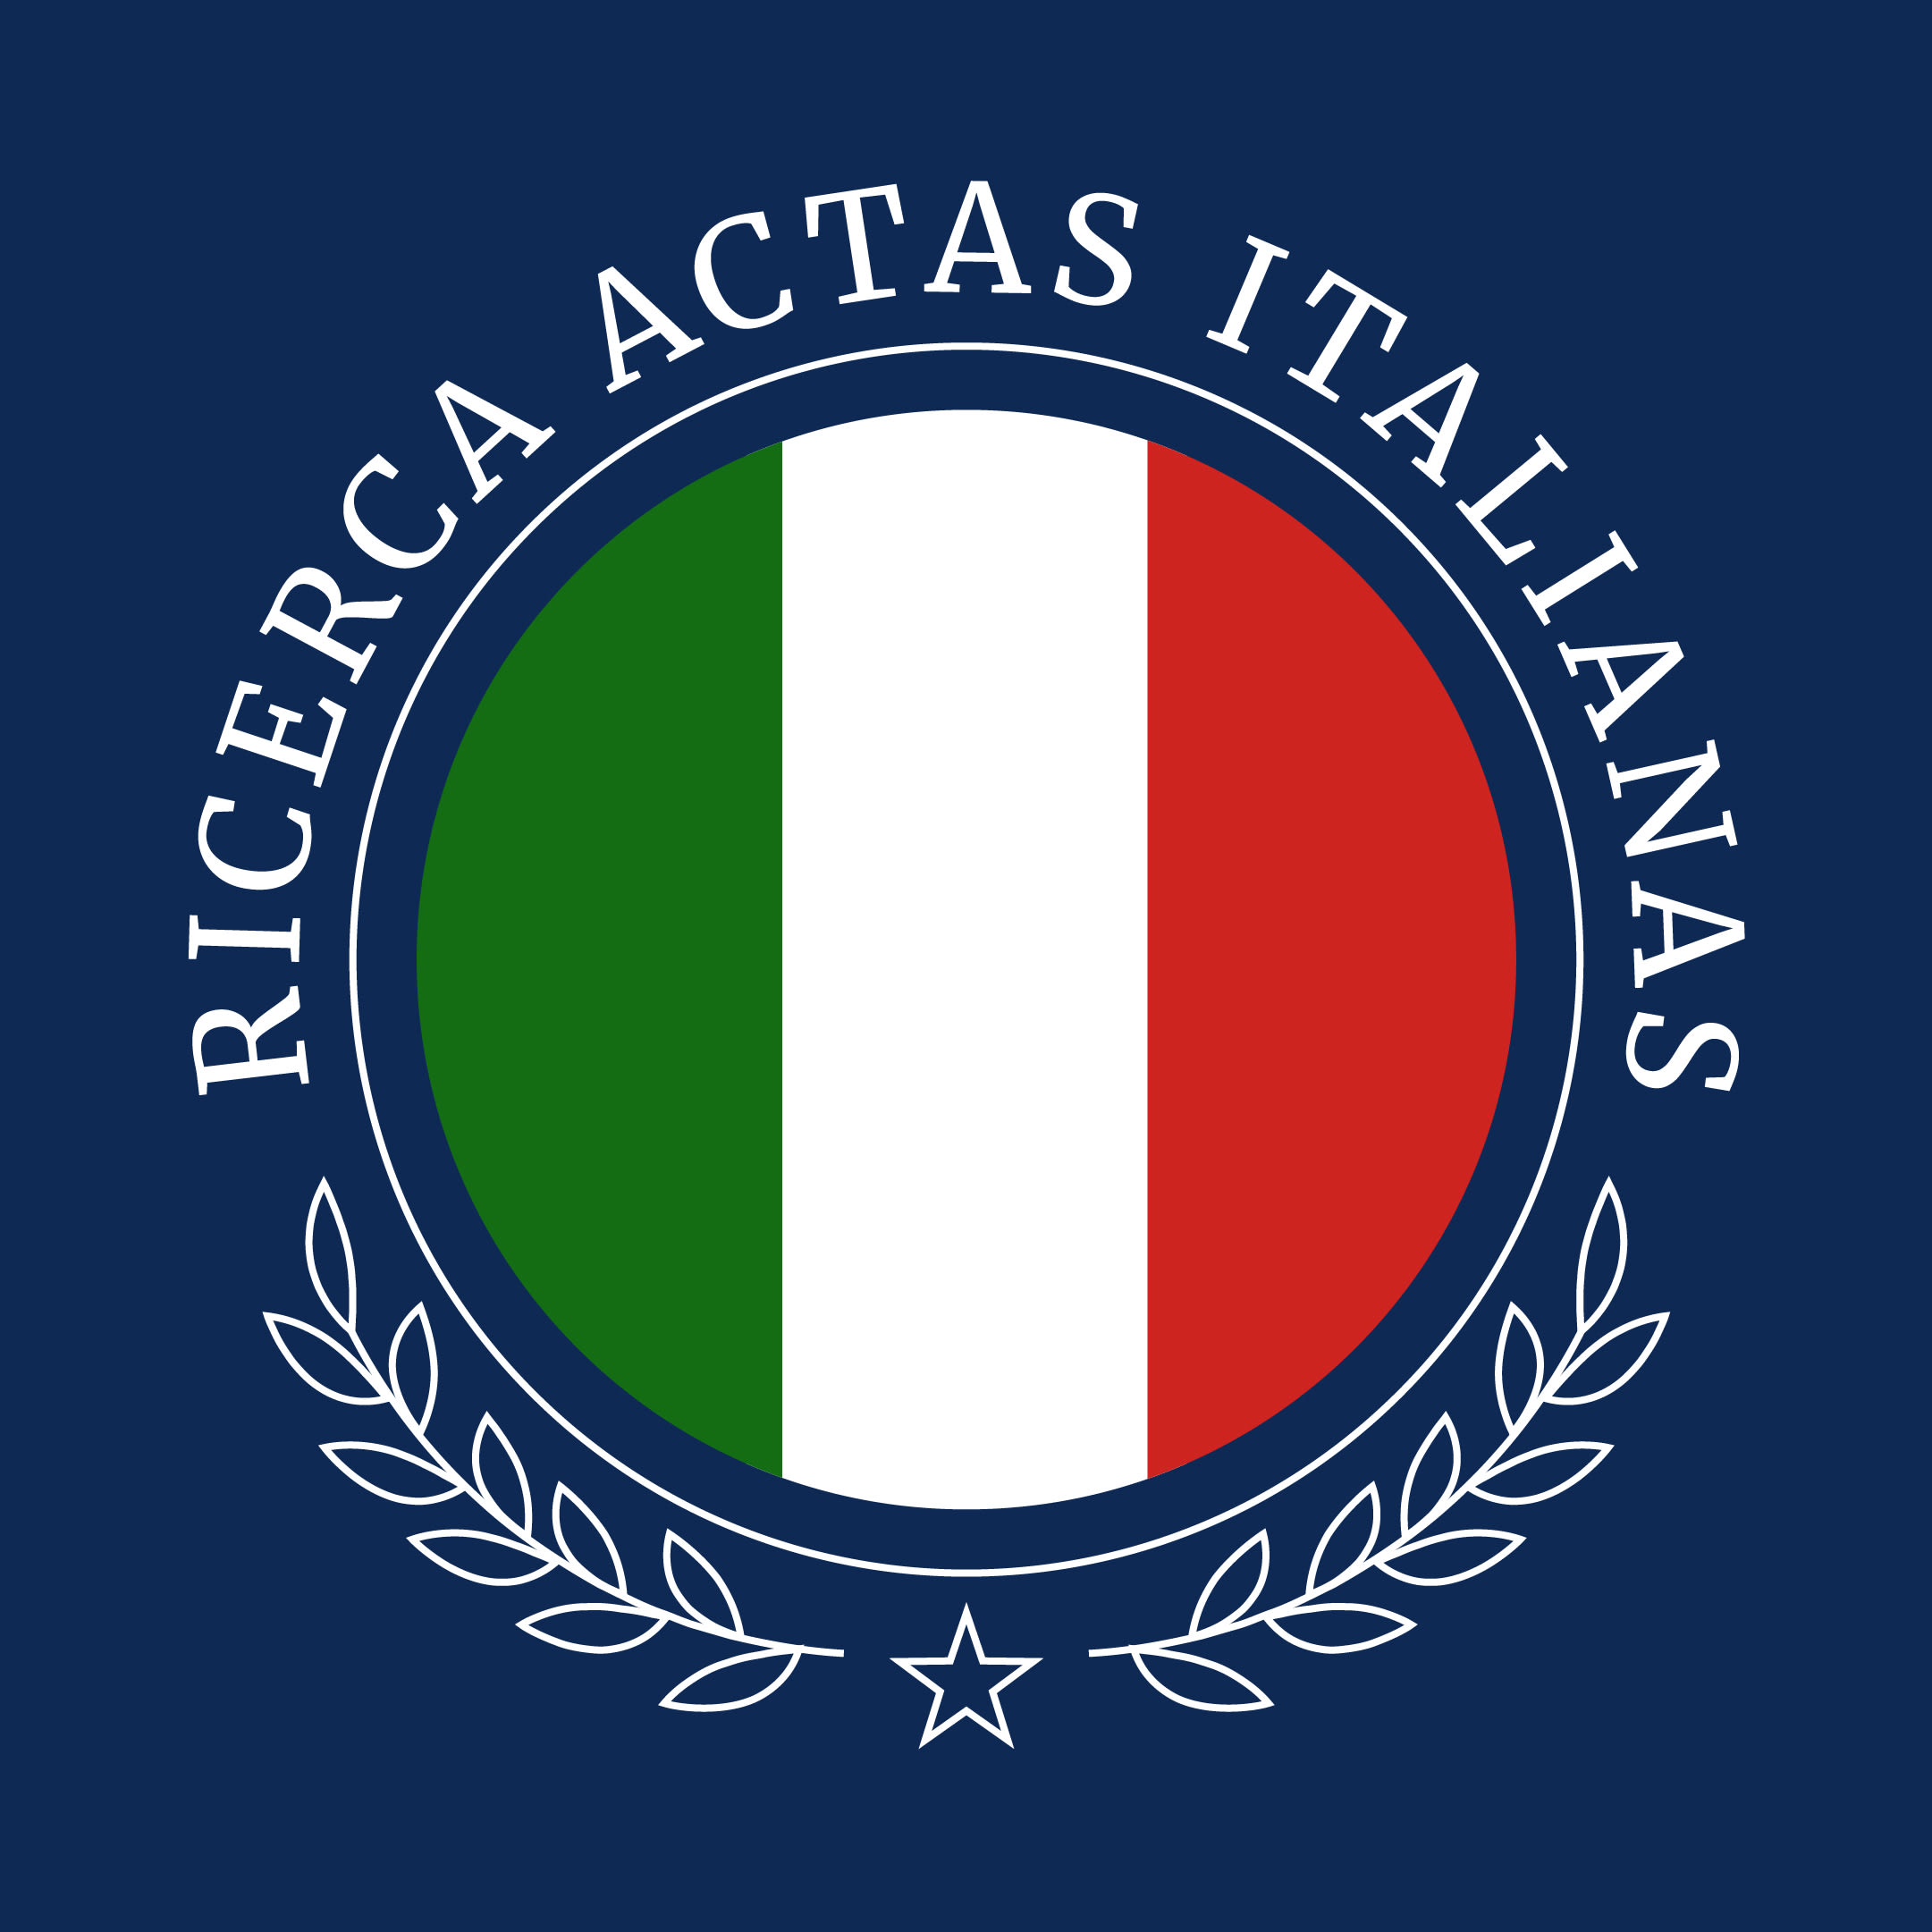 Search and find old italian documents by Actasitalianas